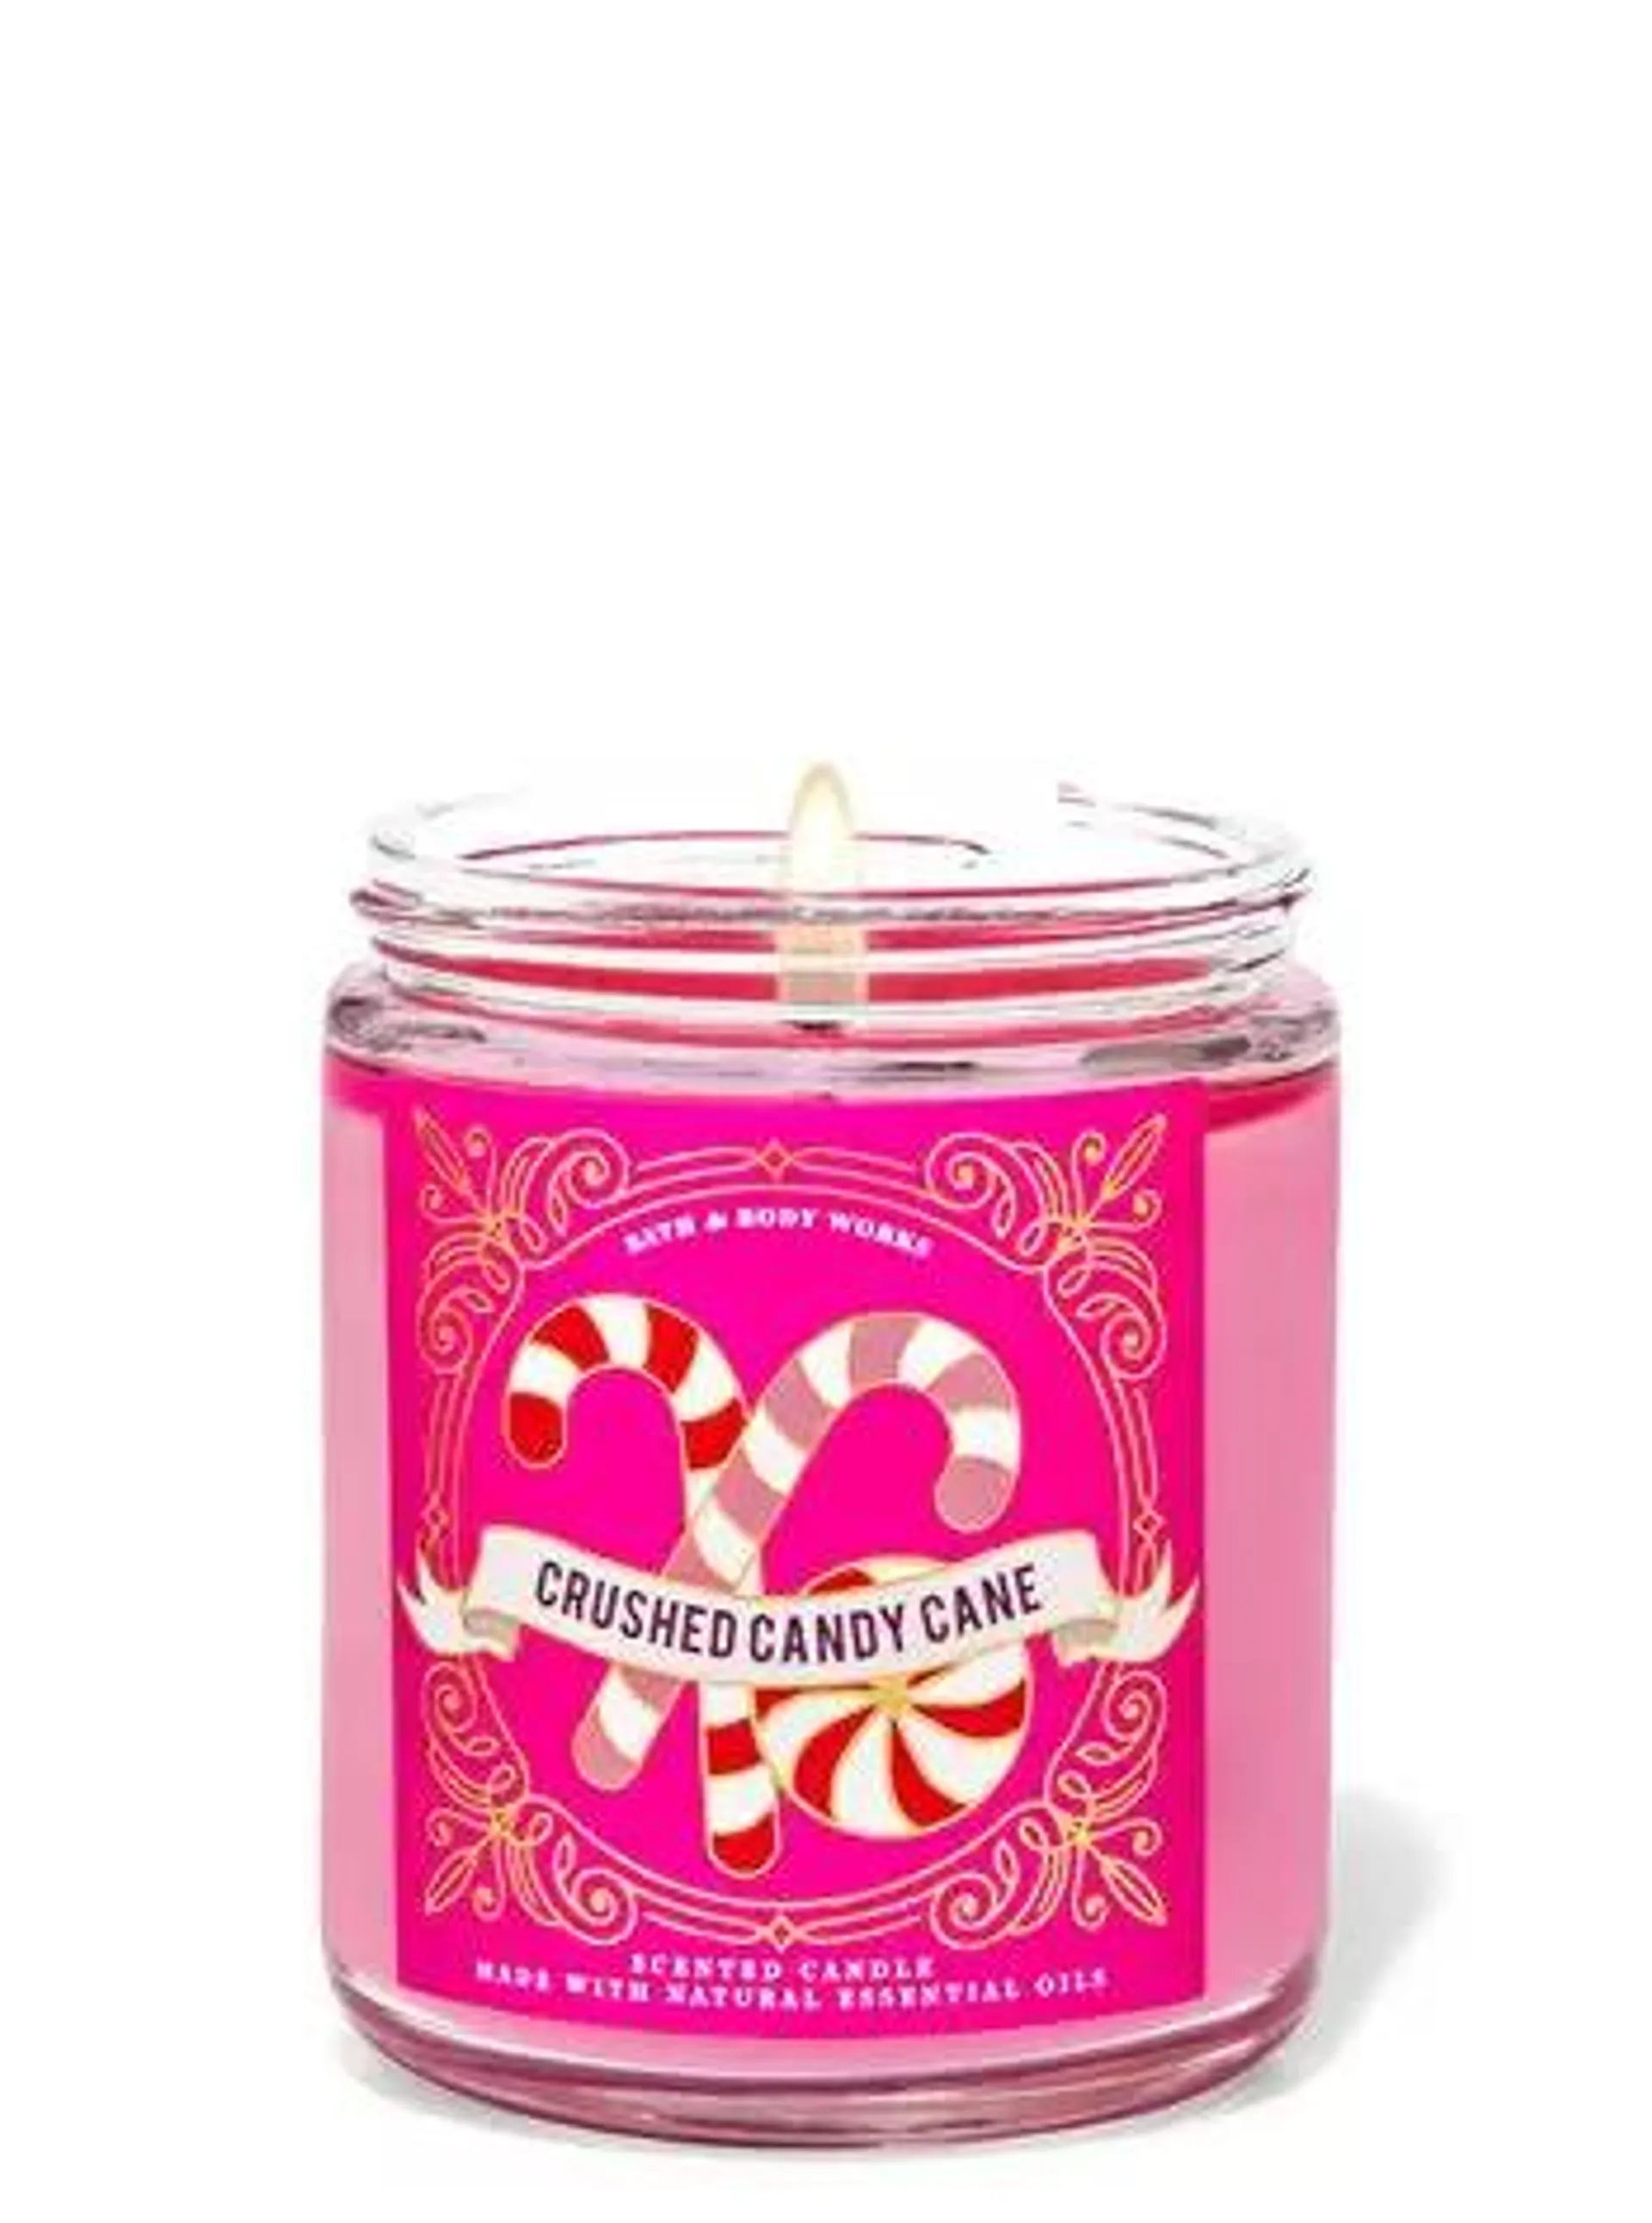 Crushed Candy Cane Single Wick Candle